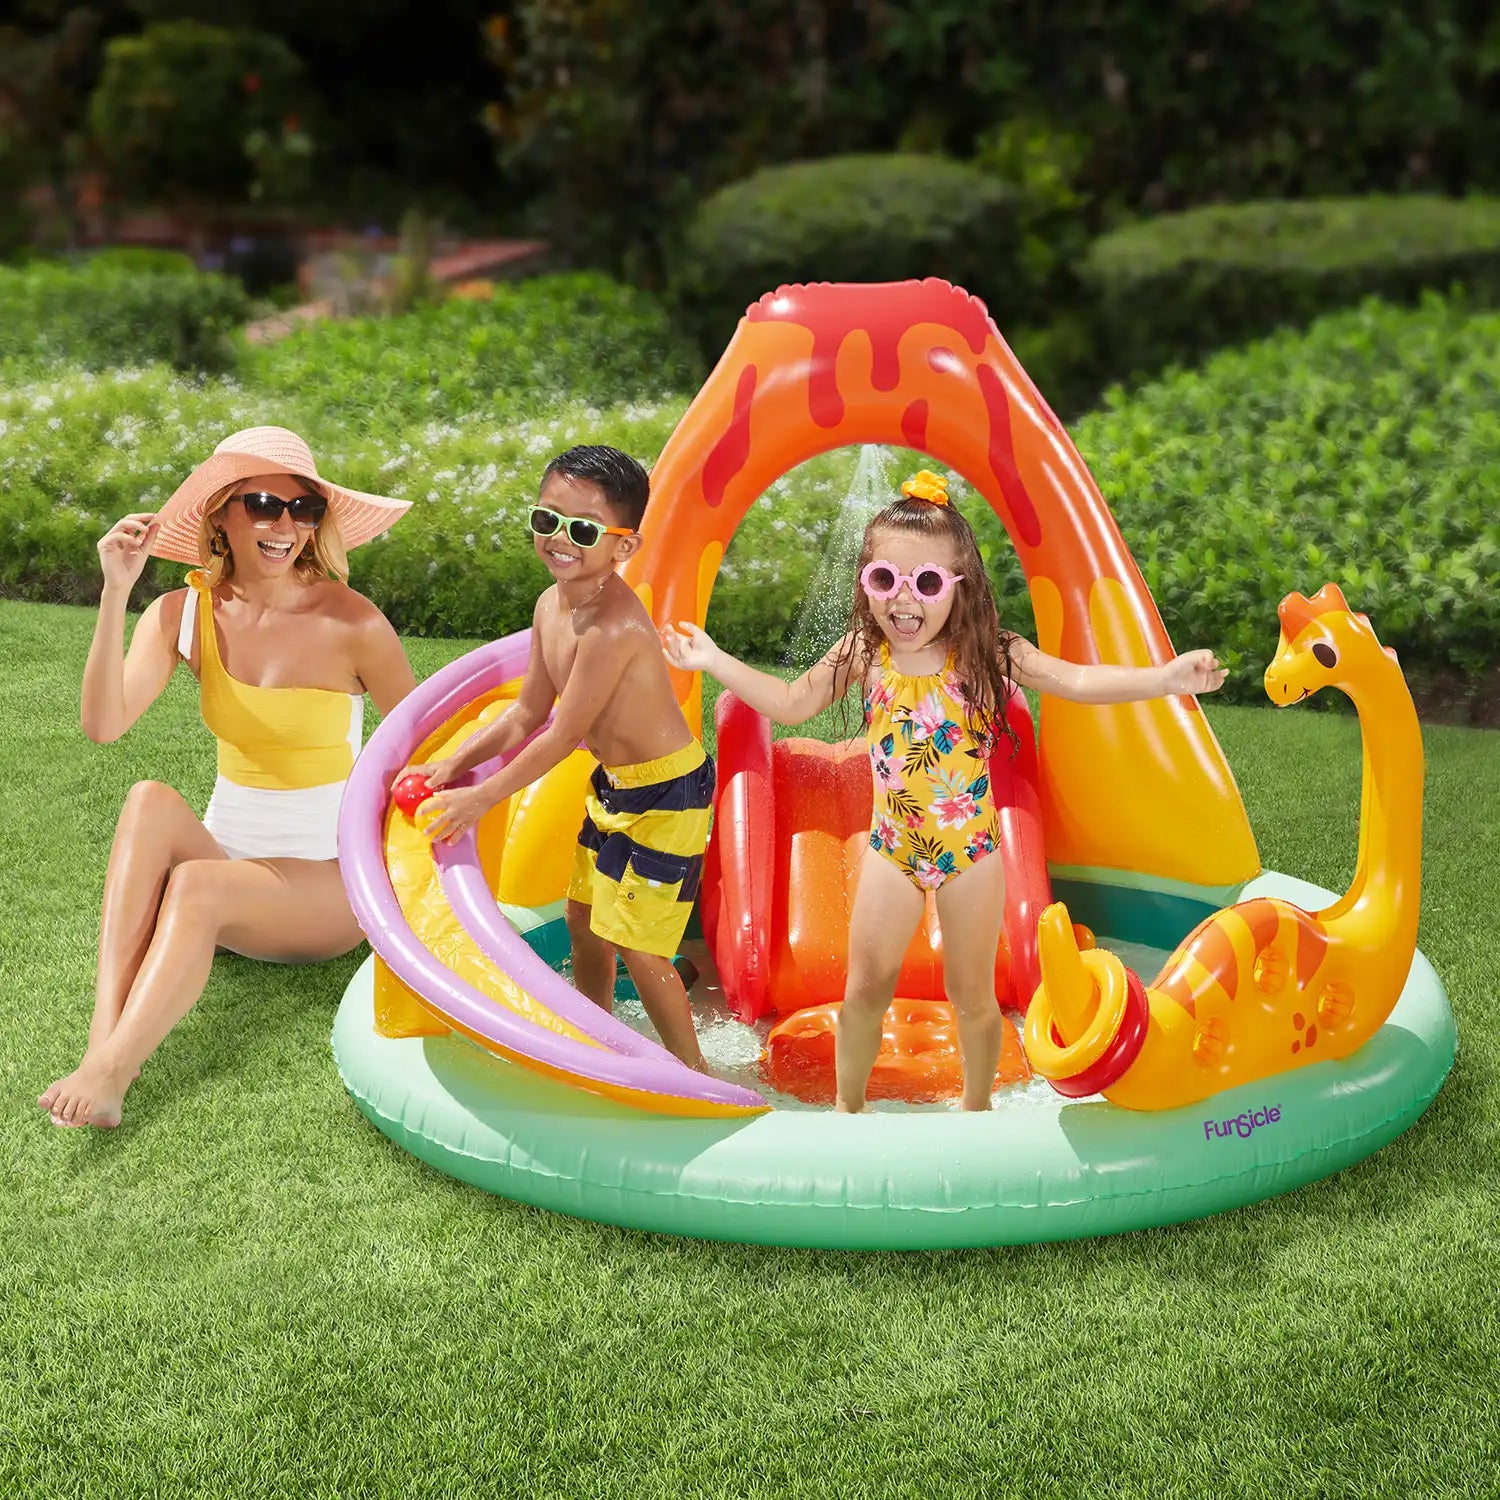 models with Funsicle Volcanic Valley Playcenter in a garden